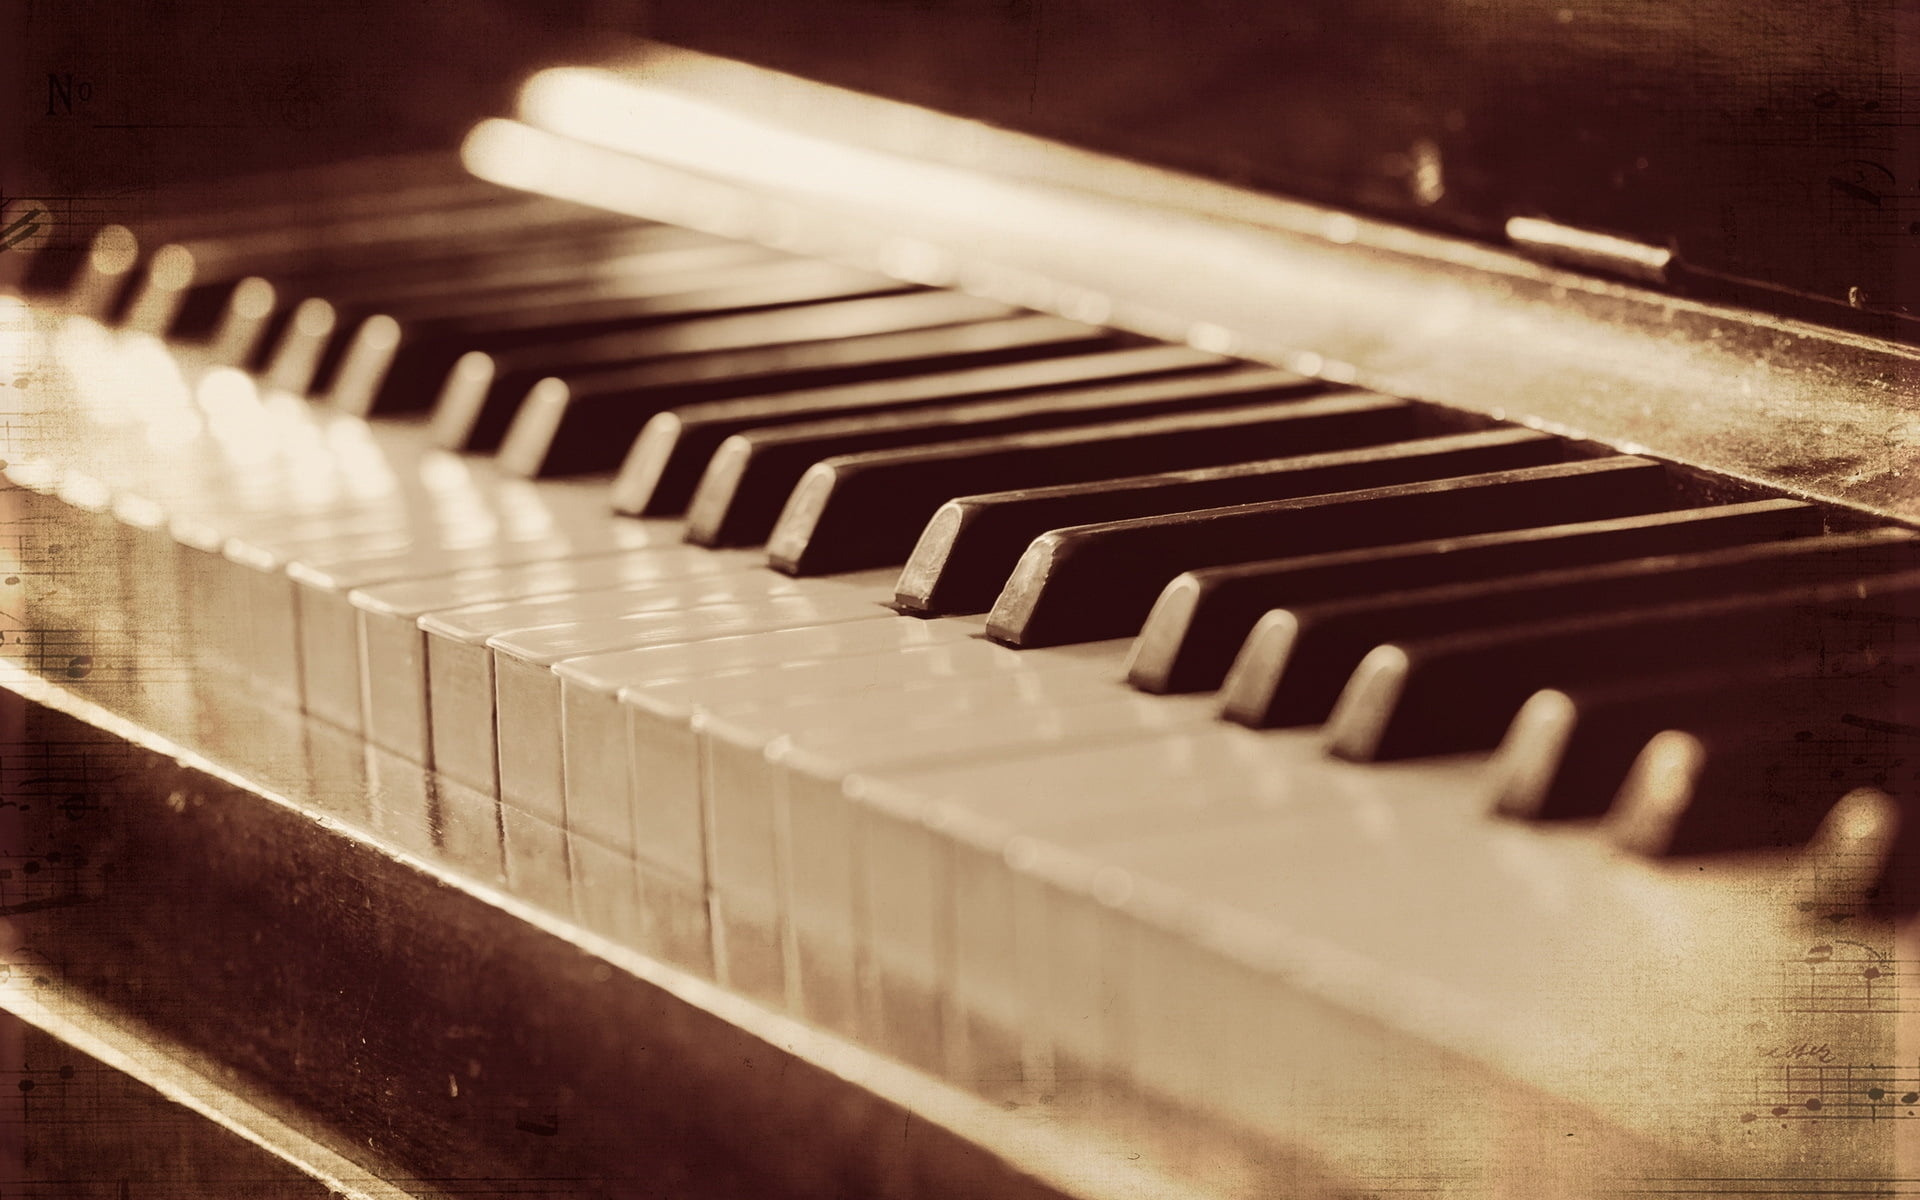 Grand Piano: A large keyboard instrument, each key of which operates a small, felt-covered hammer. 1920x1200 HD Wallpaper.